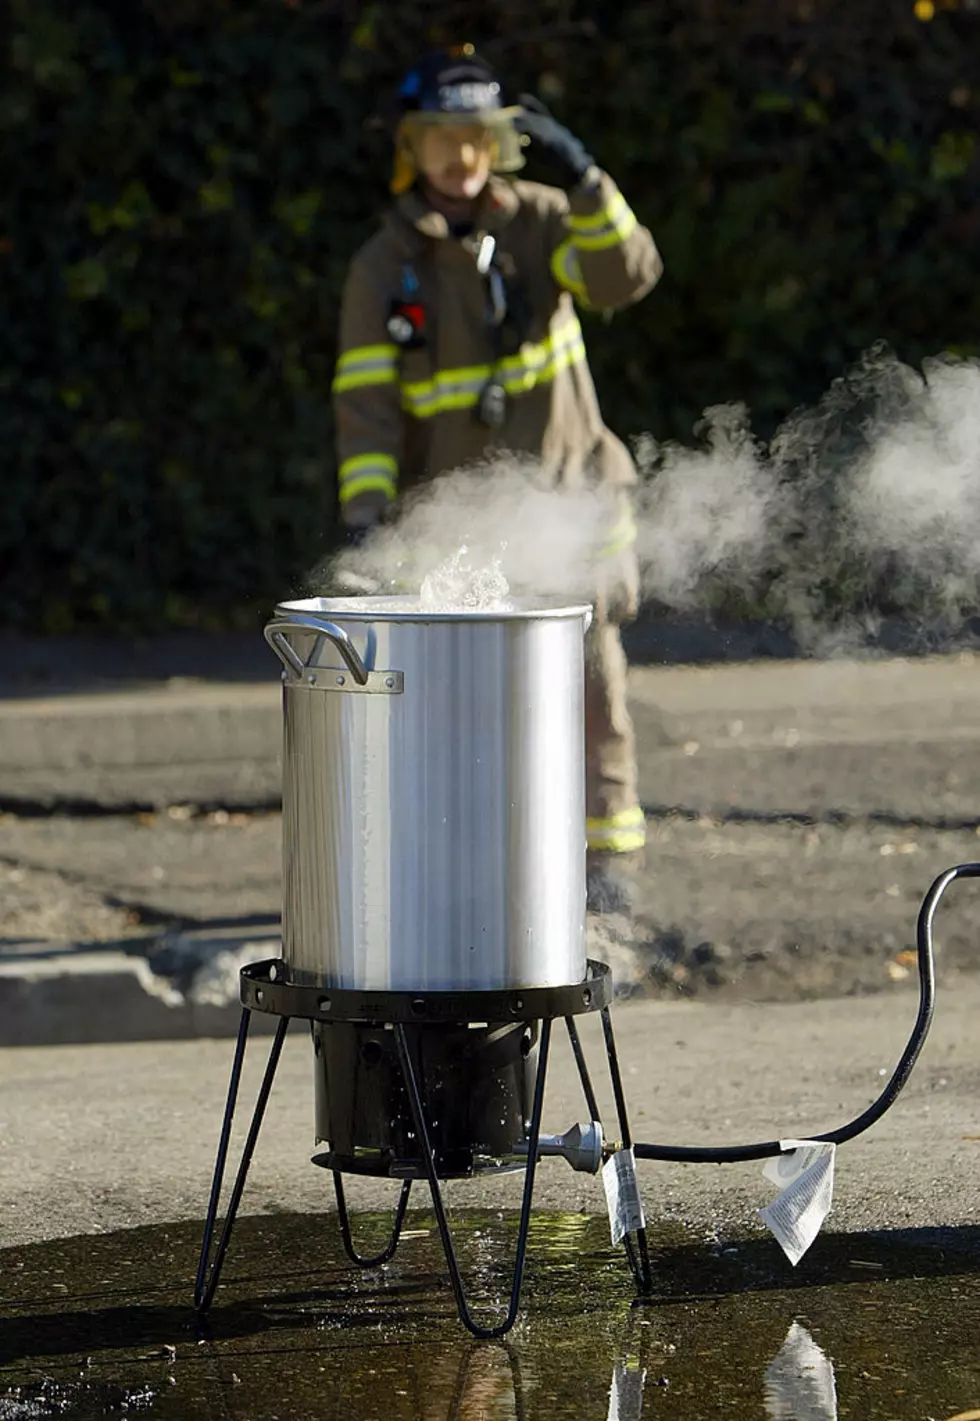 Texas Starts A Lot Of Fires Frying Turkeys. Here&#8217;s How Not To.